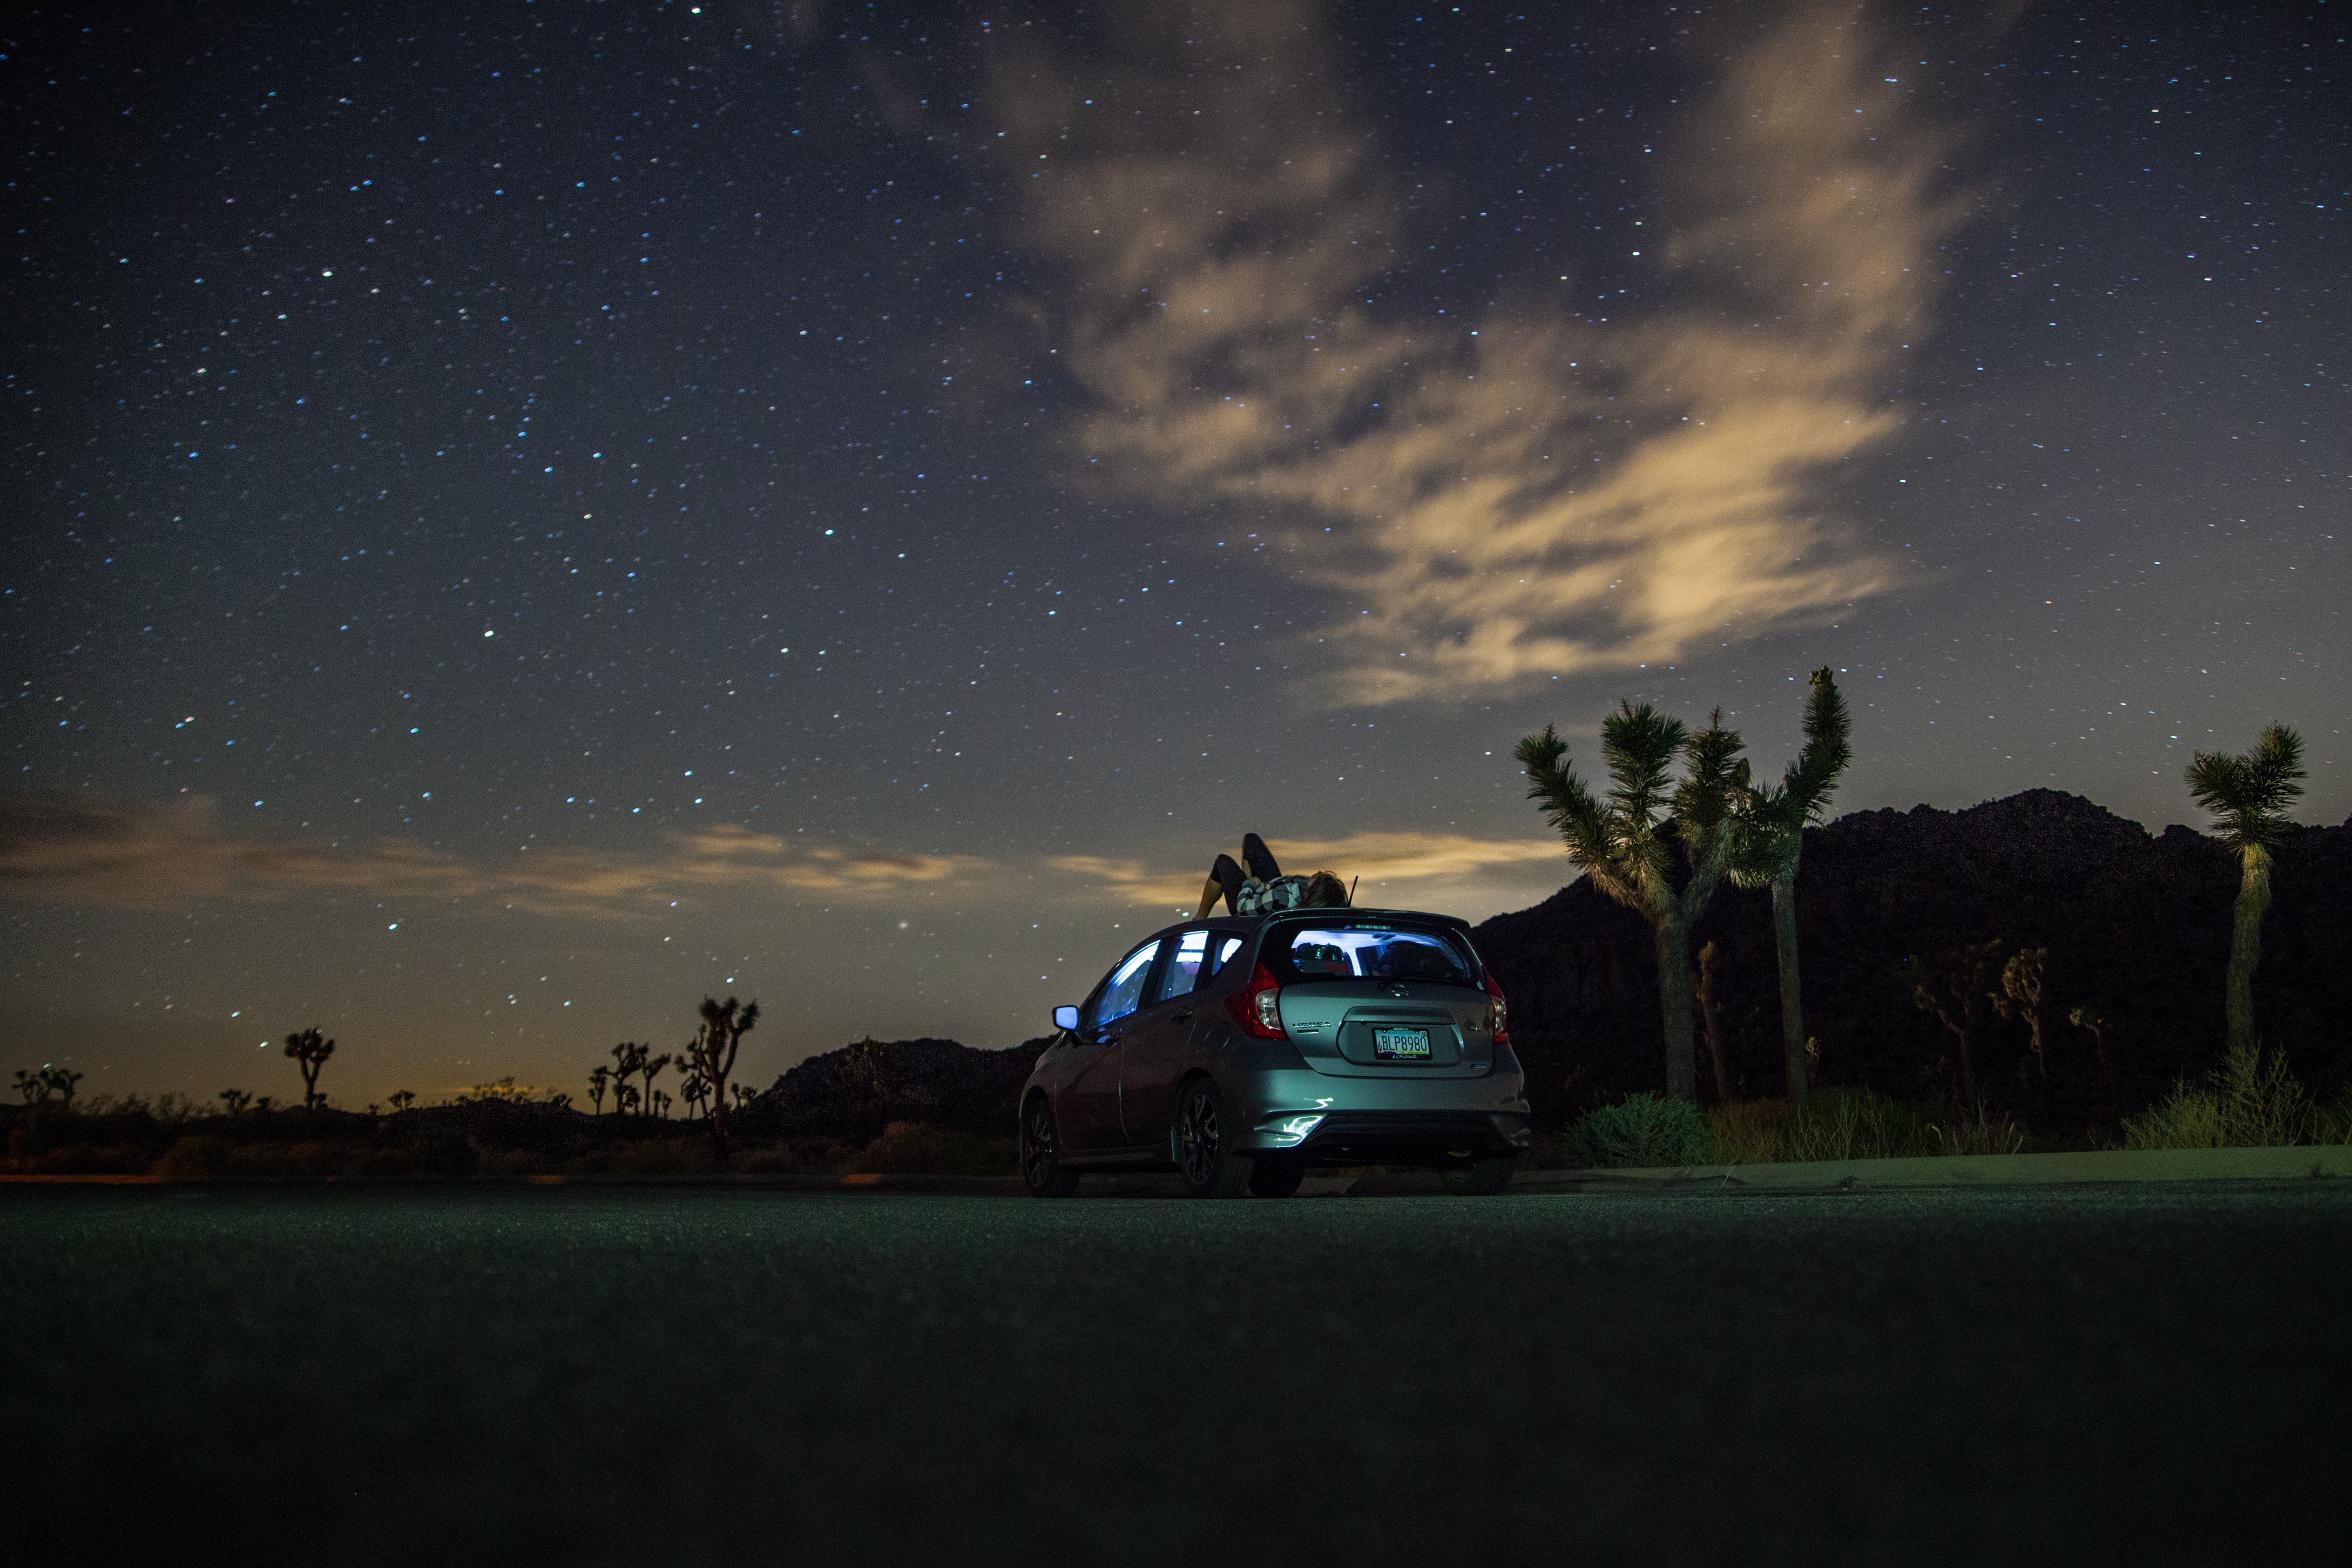 privacy, human, loneliness, palms, cars, seclusion, car, starry sky, person